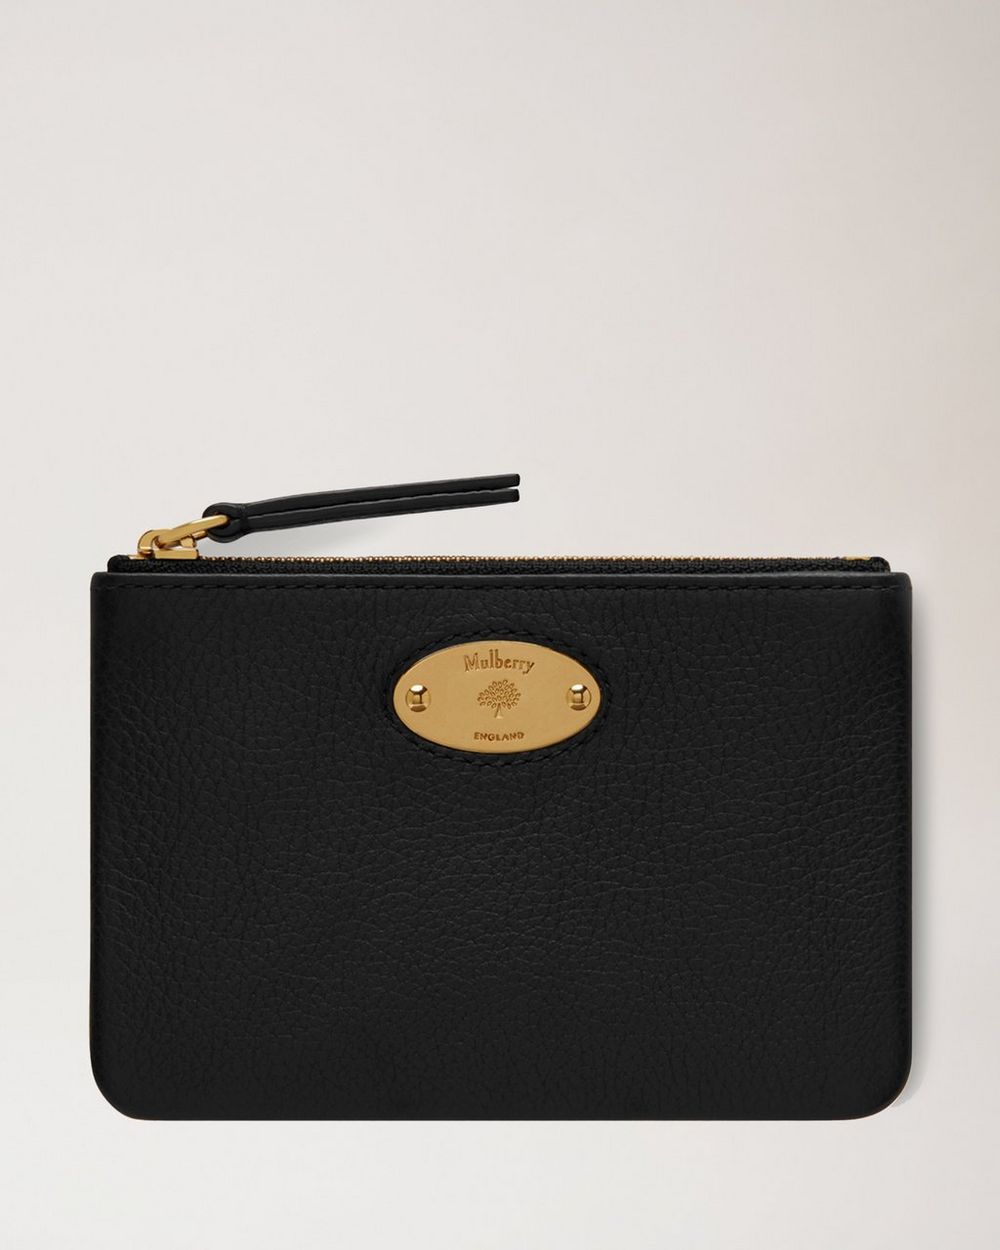 Mulberry Exchange: switch your old Mulberry bag for credit to